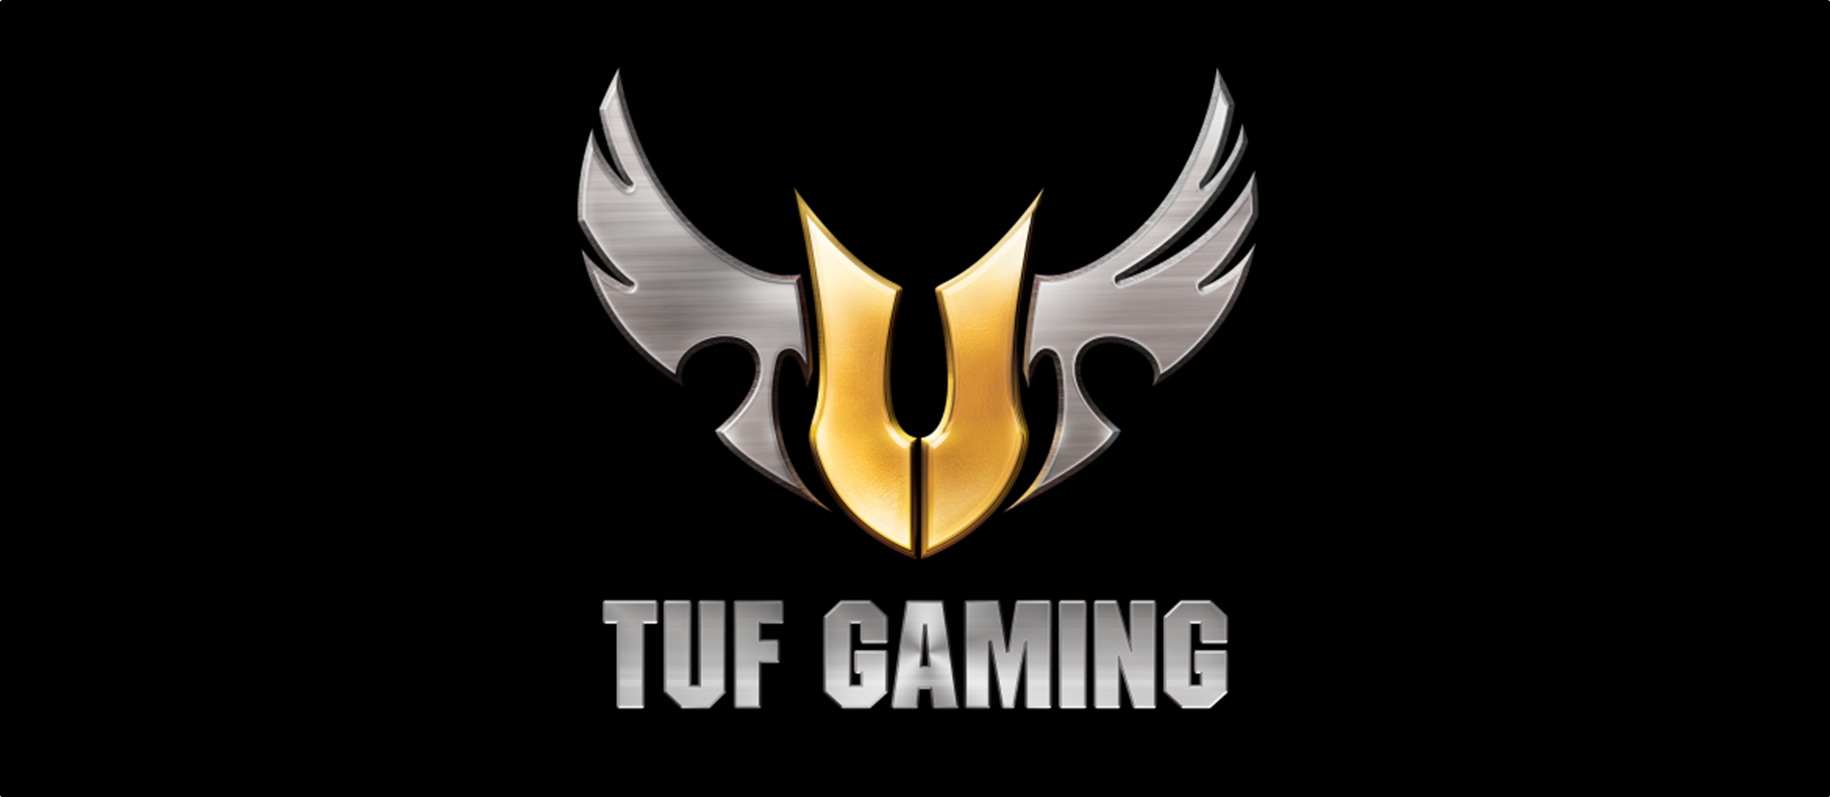 Asus introduces the FX505 and FX705 to the TUF Gaming ...